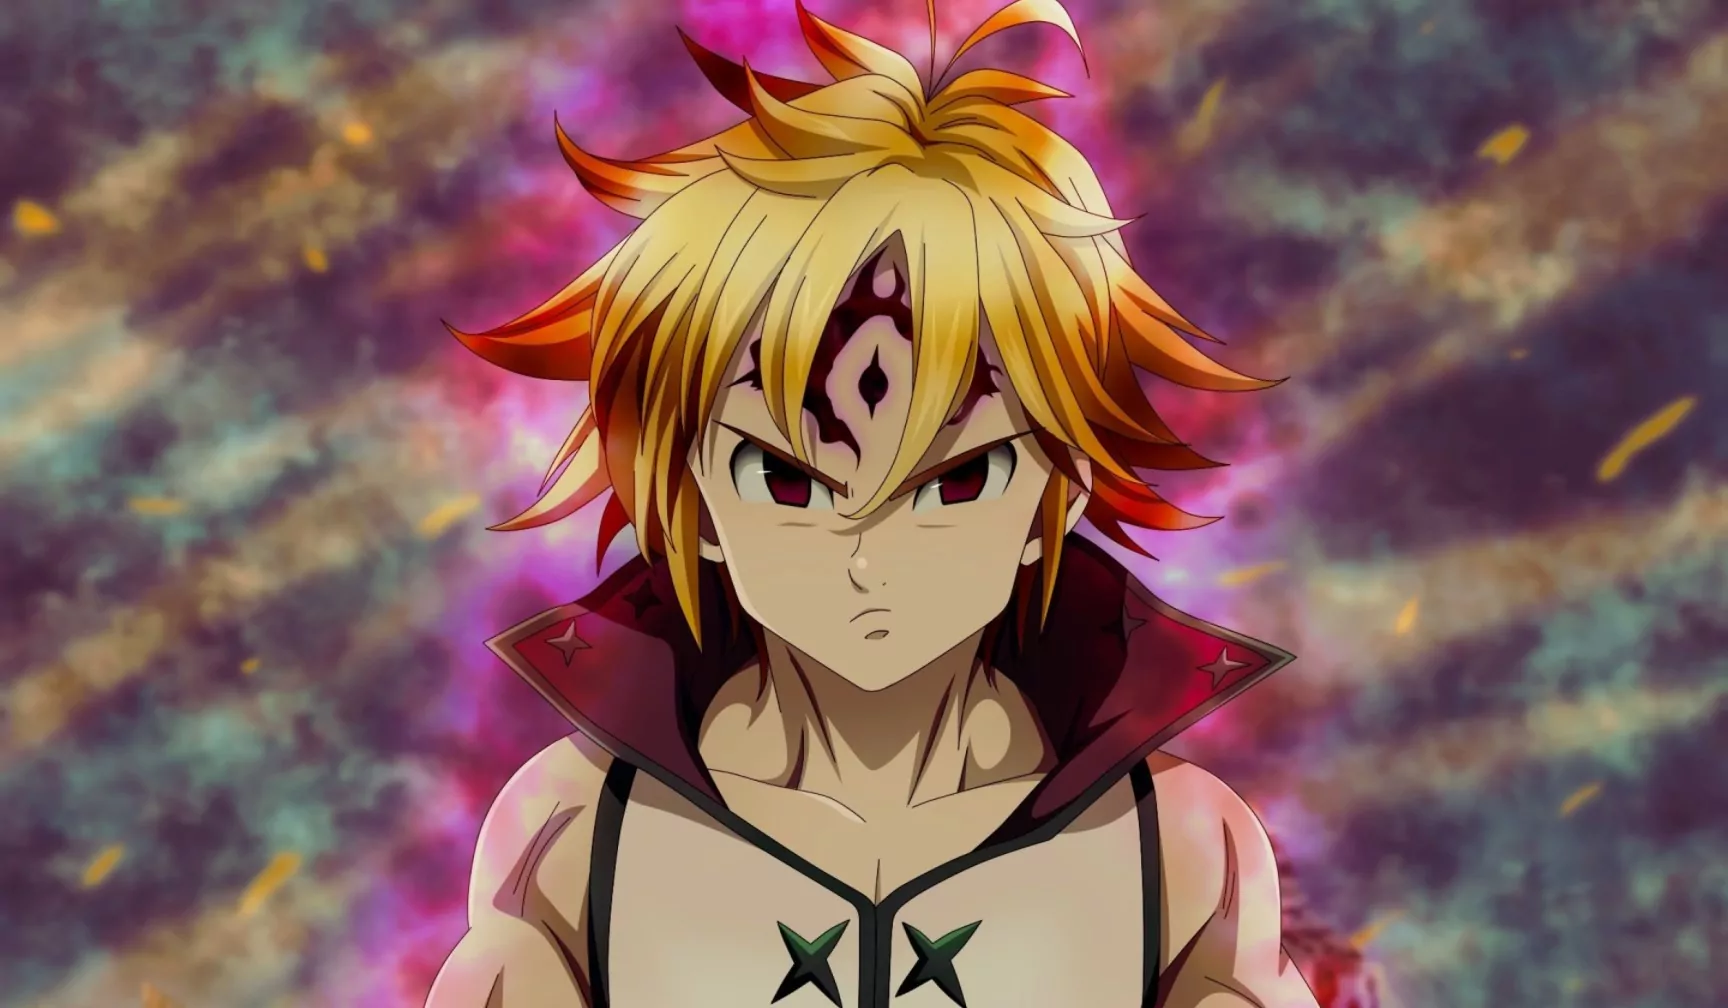 Best Demon Lord Anime/Demon King Anime- The Seven Deadly Sins